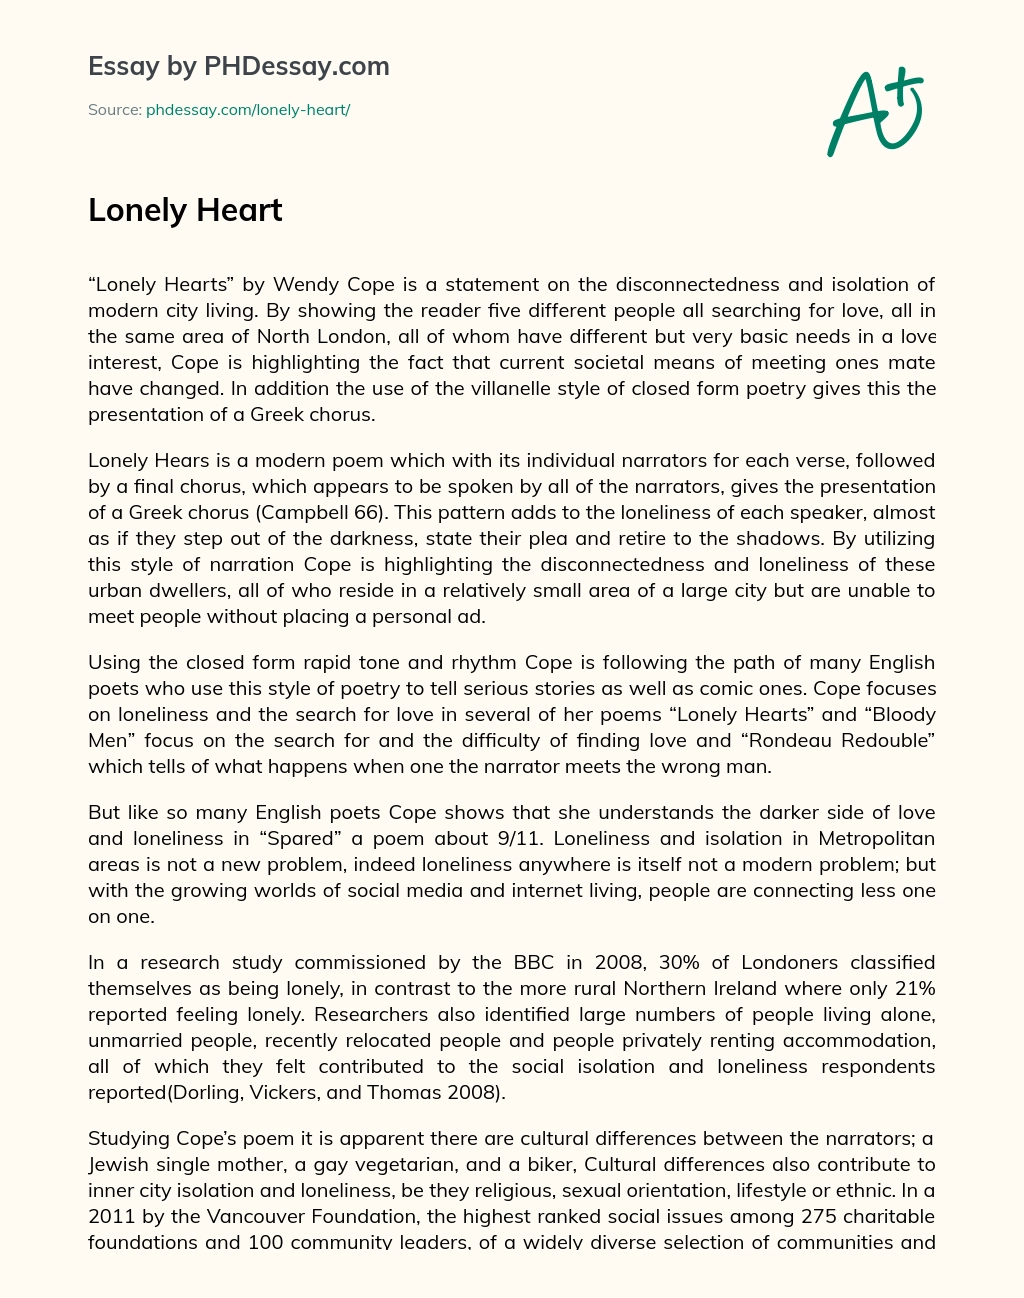 Lonely Heart essay